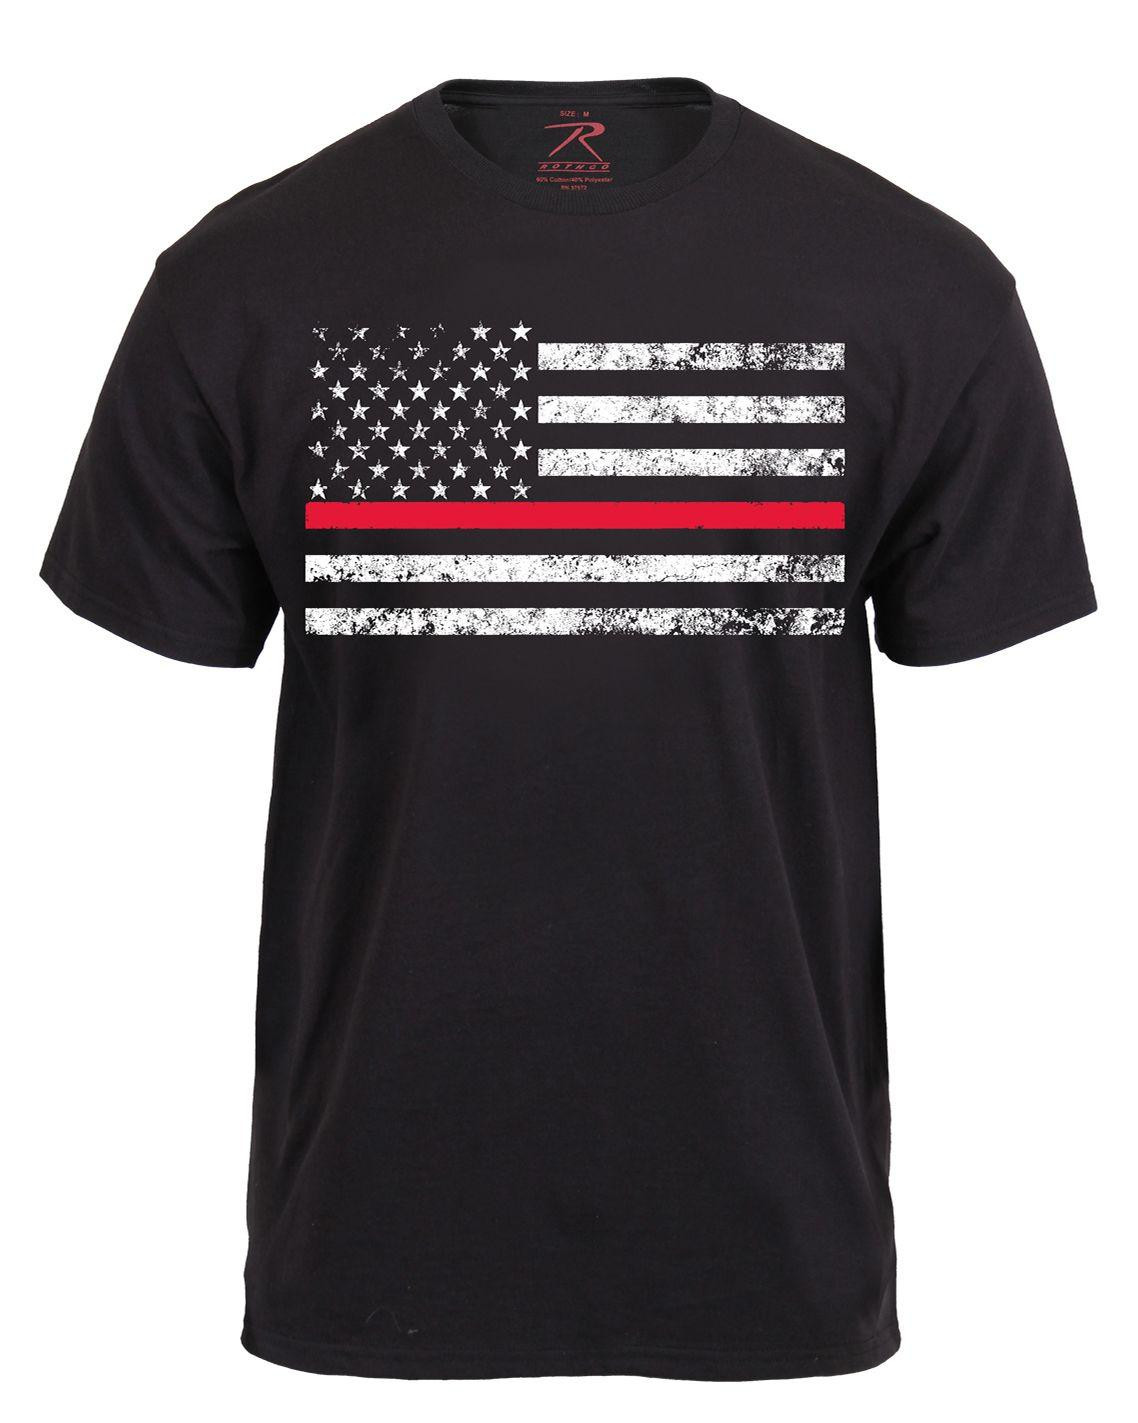 5: Rothco T-Shirt - Thin Red Line (Sort, S)